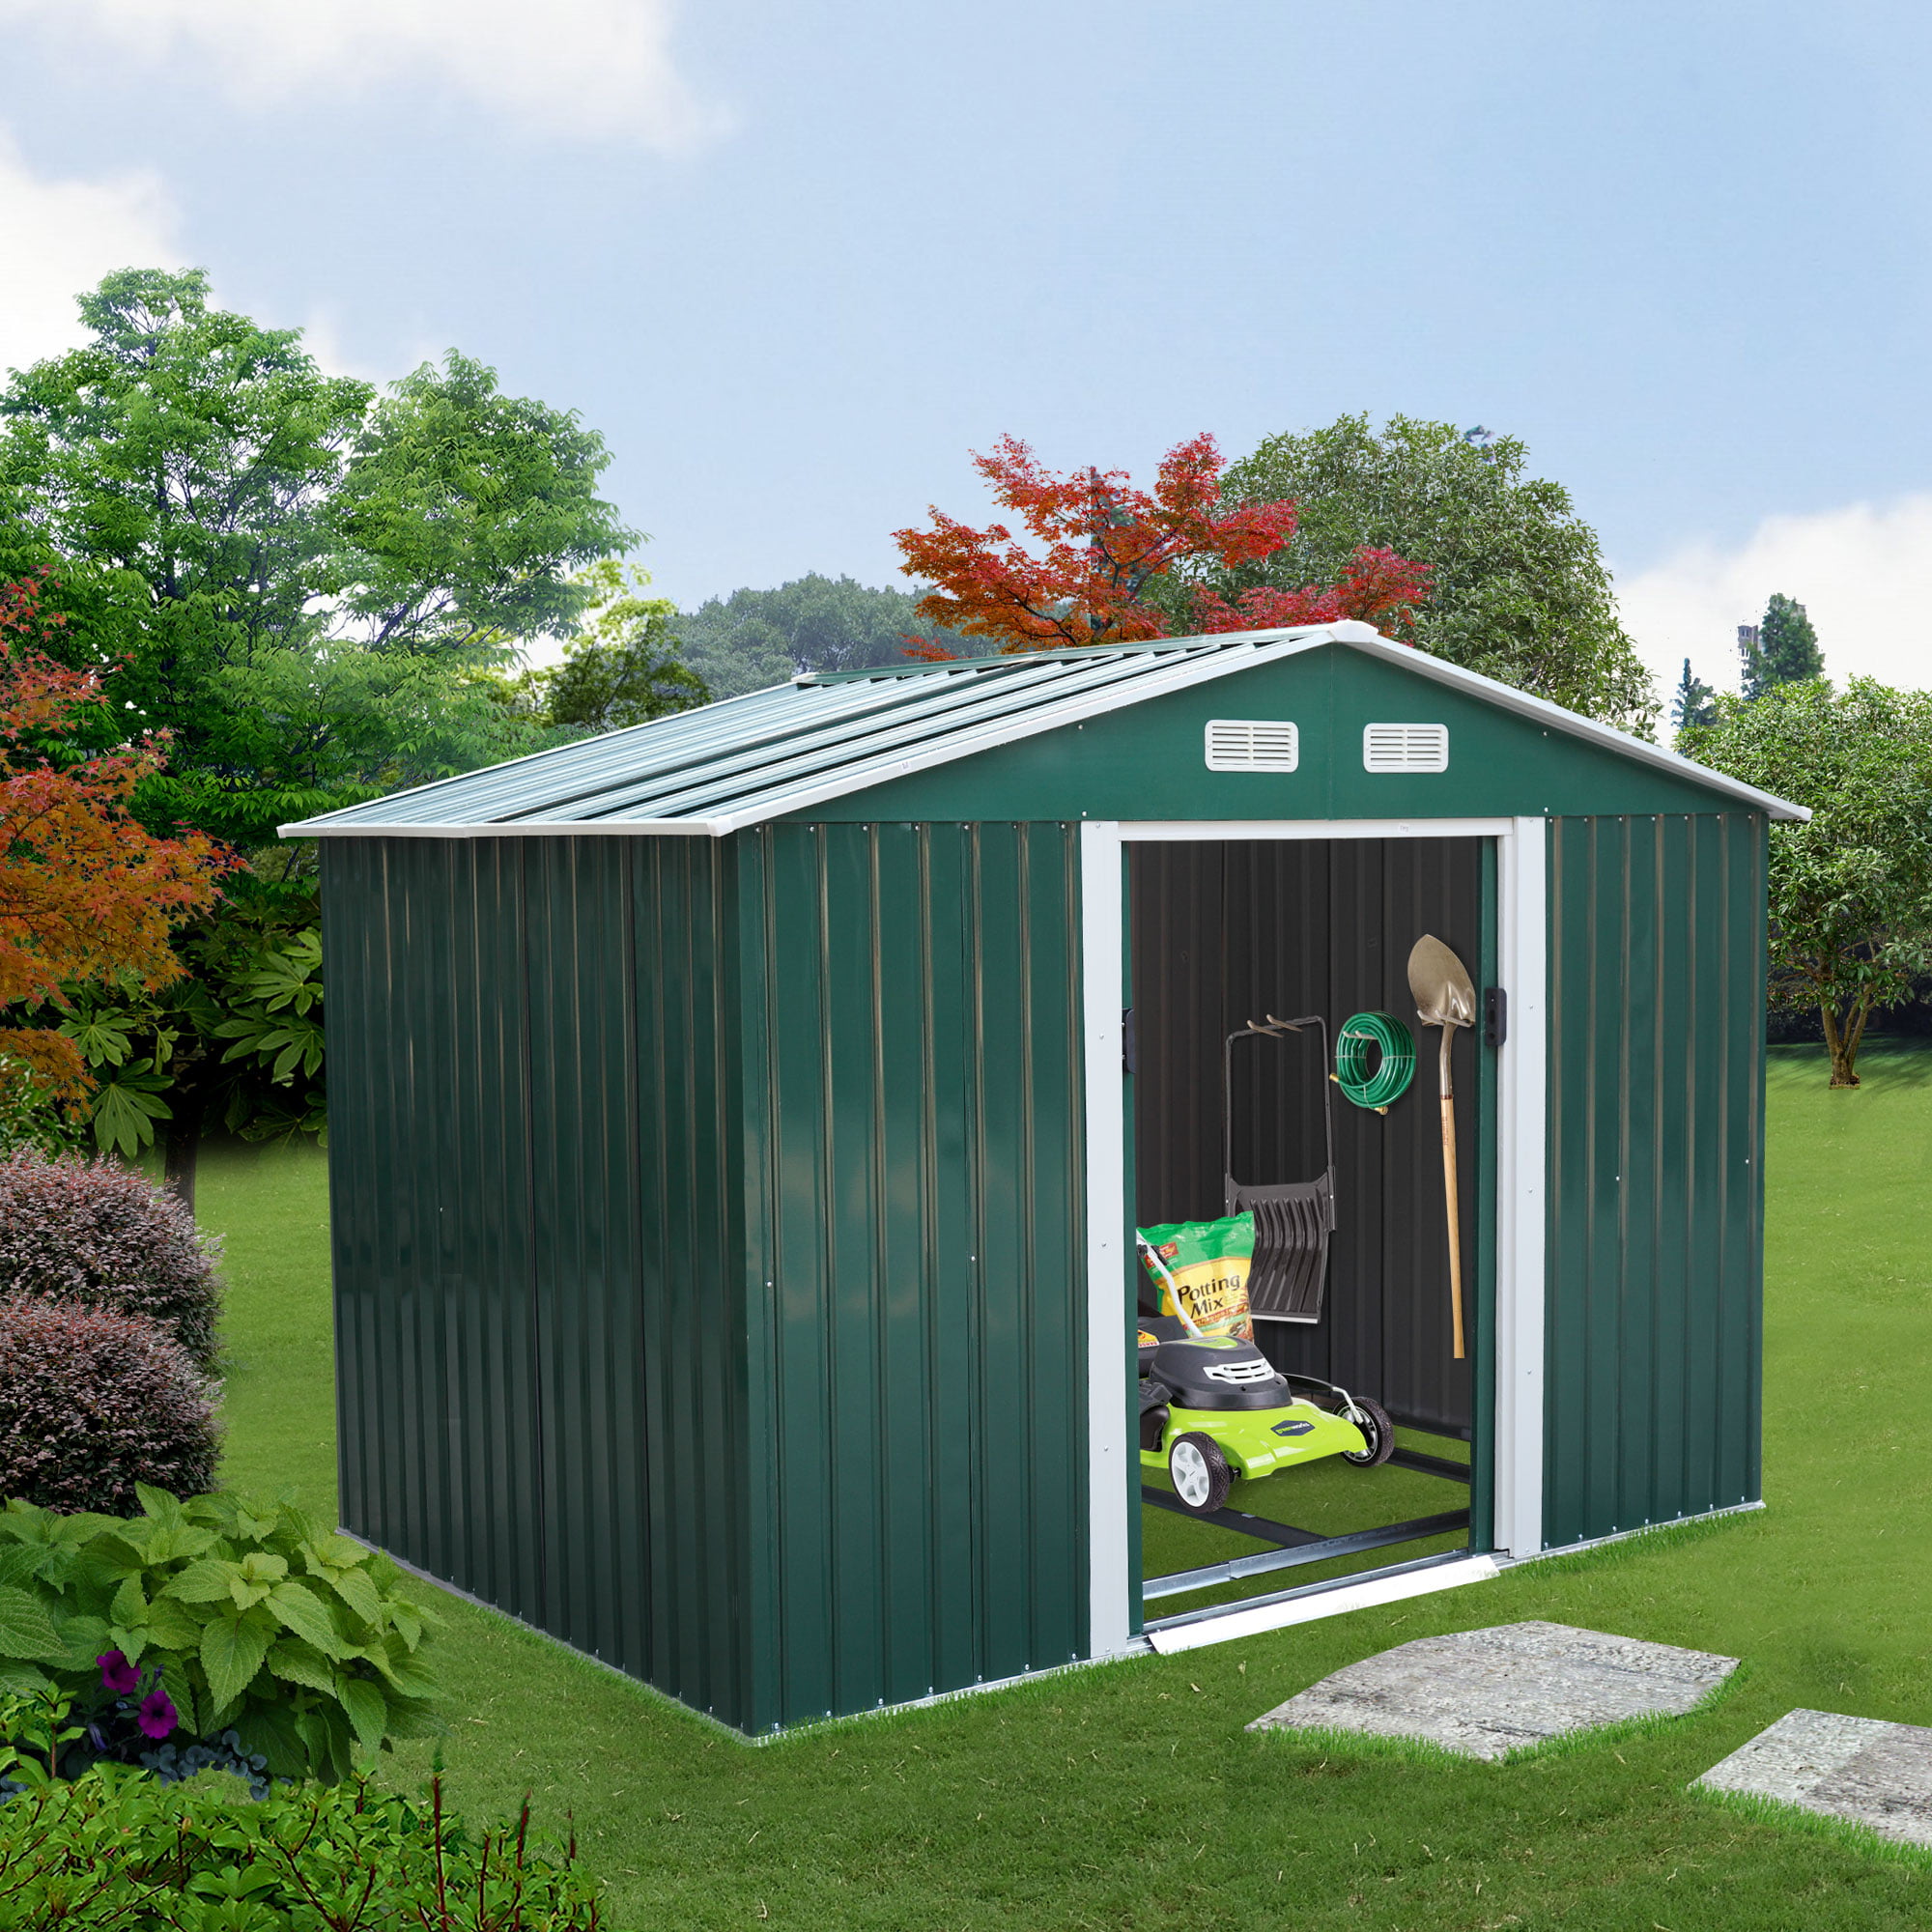 Jaxpety 9' x 6' Large Outdoor Steel Storage Shed with Gable Roof, 4 Vents, a Double Sliding Door